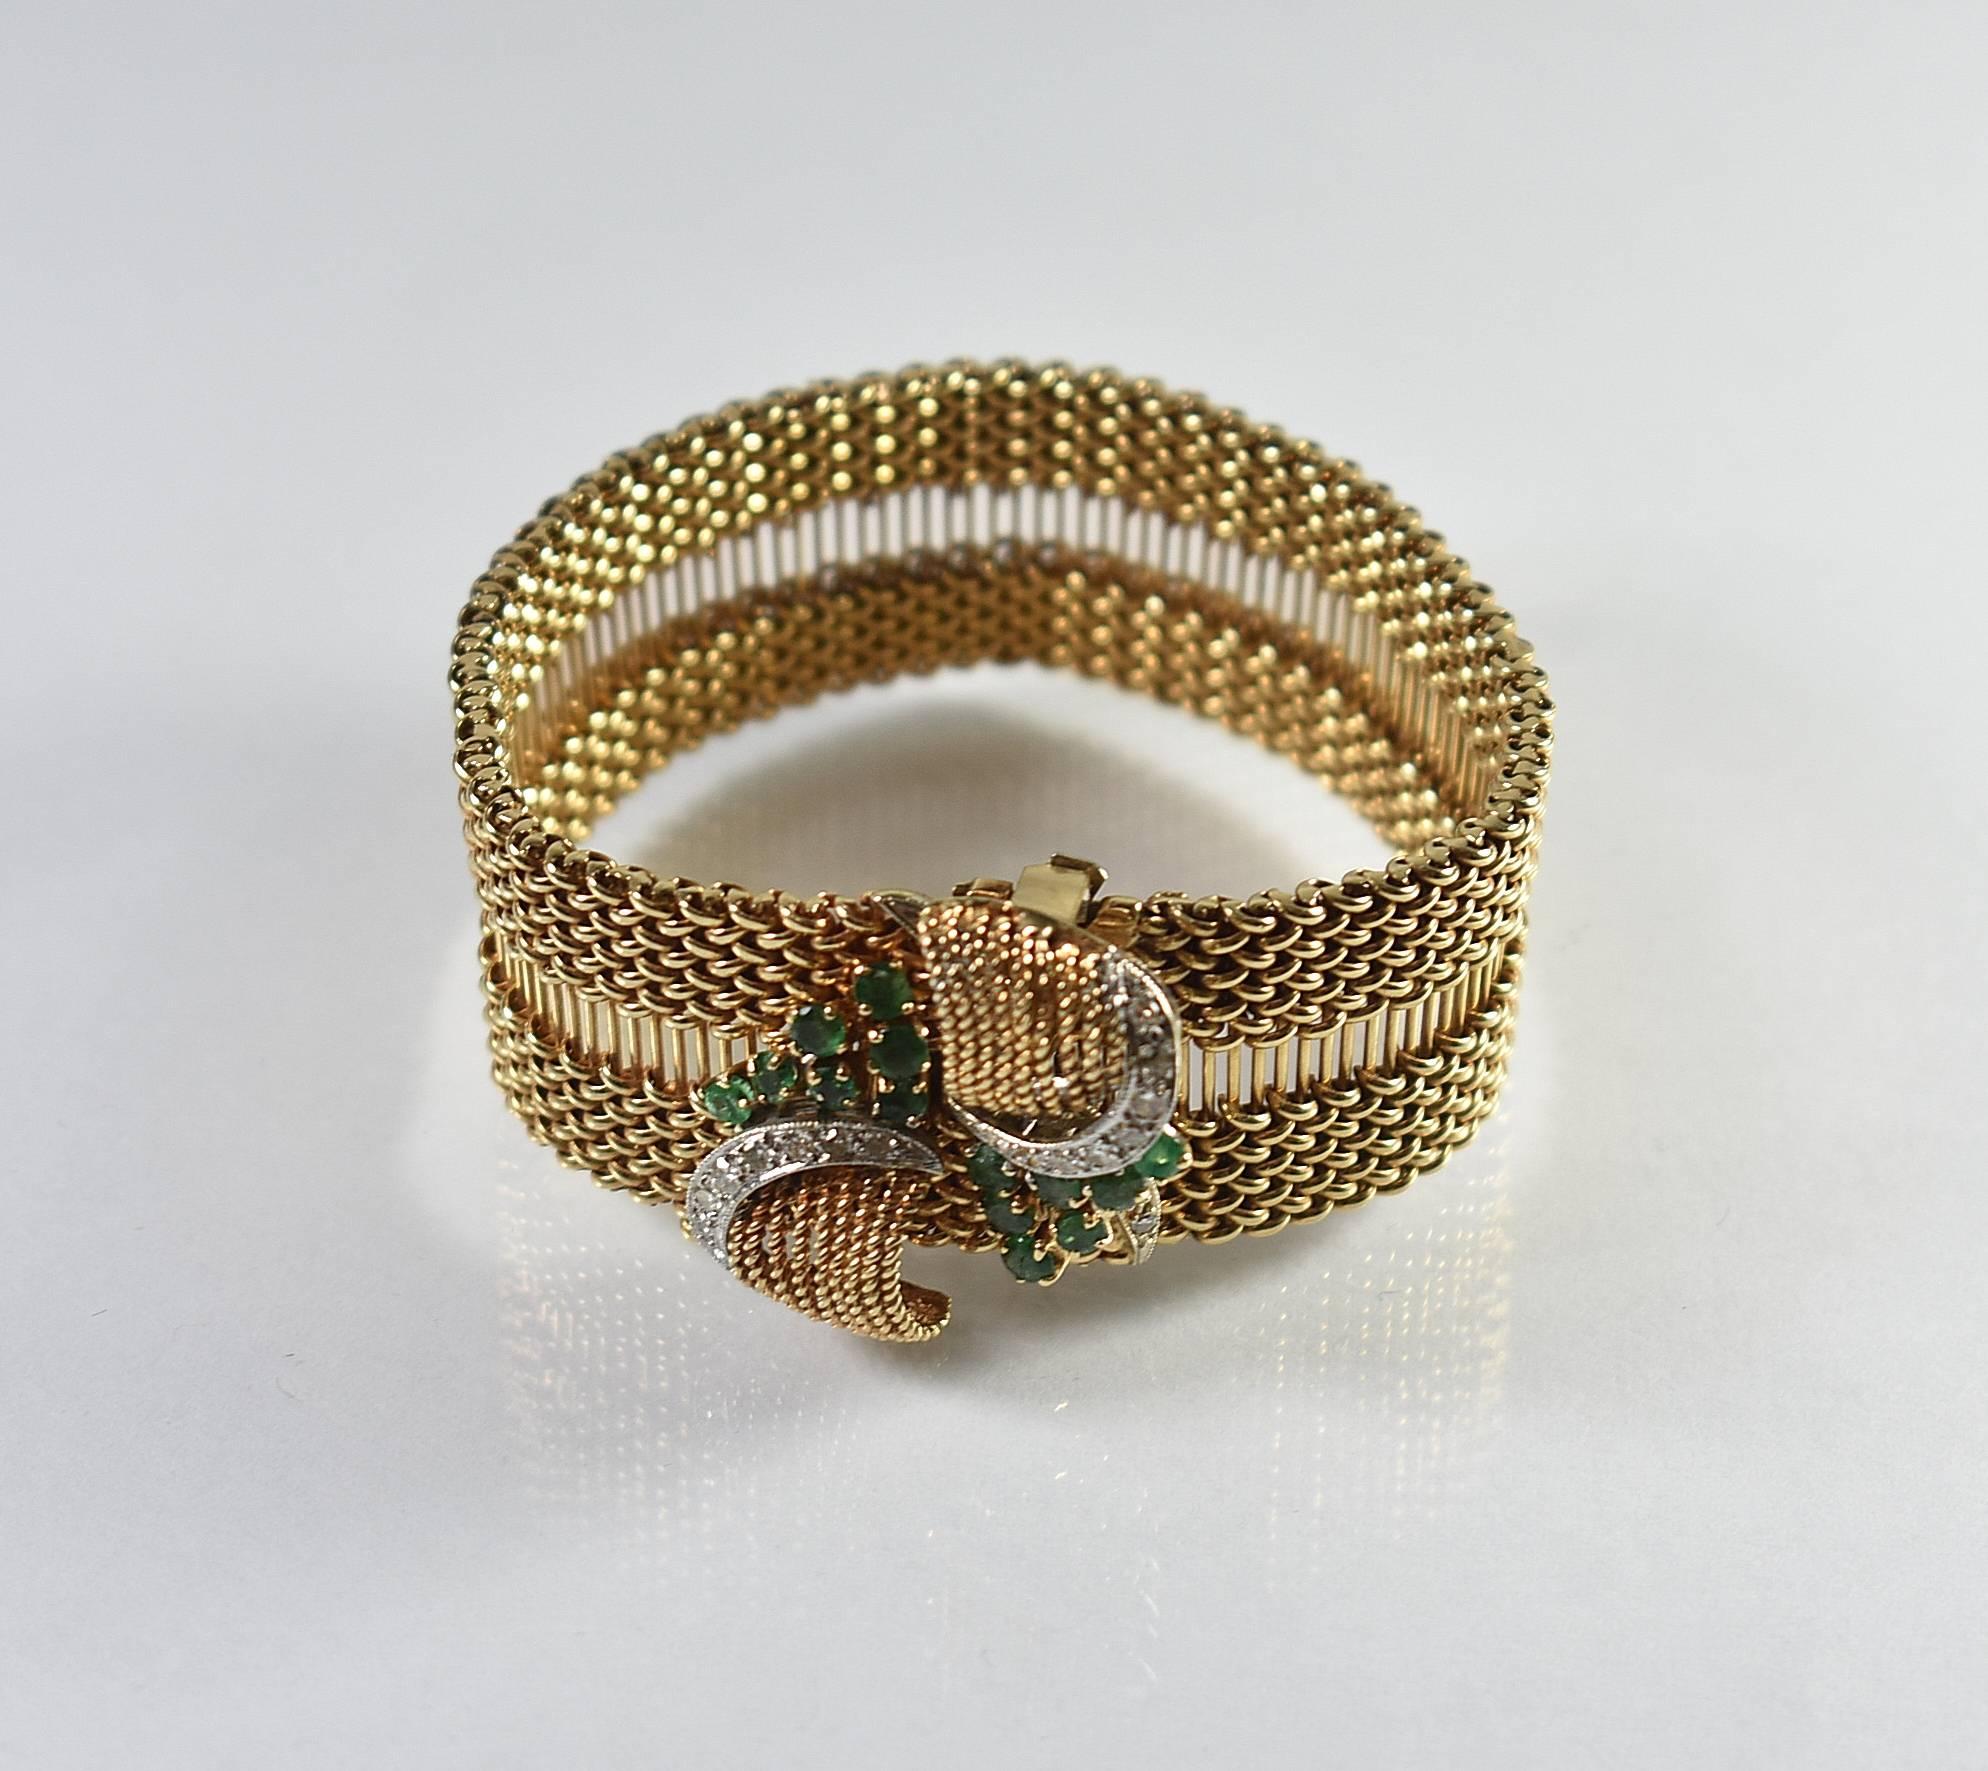 A stunning and 14-karat yellow gold, diamond and emerald bracelet. This beautiful bracelet features a 14-karat mesh link, two hinged clasps with white gold mounts with 16 diamonds and a cluster of 14 emeralds on each clasp. It is 7.5